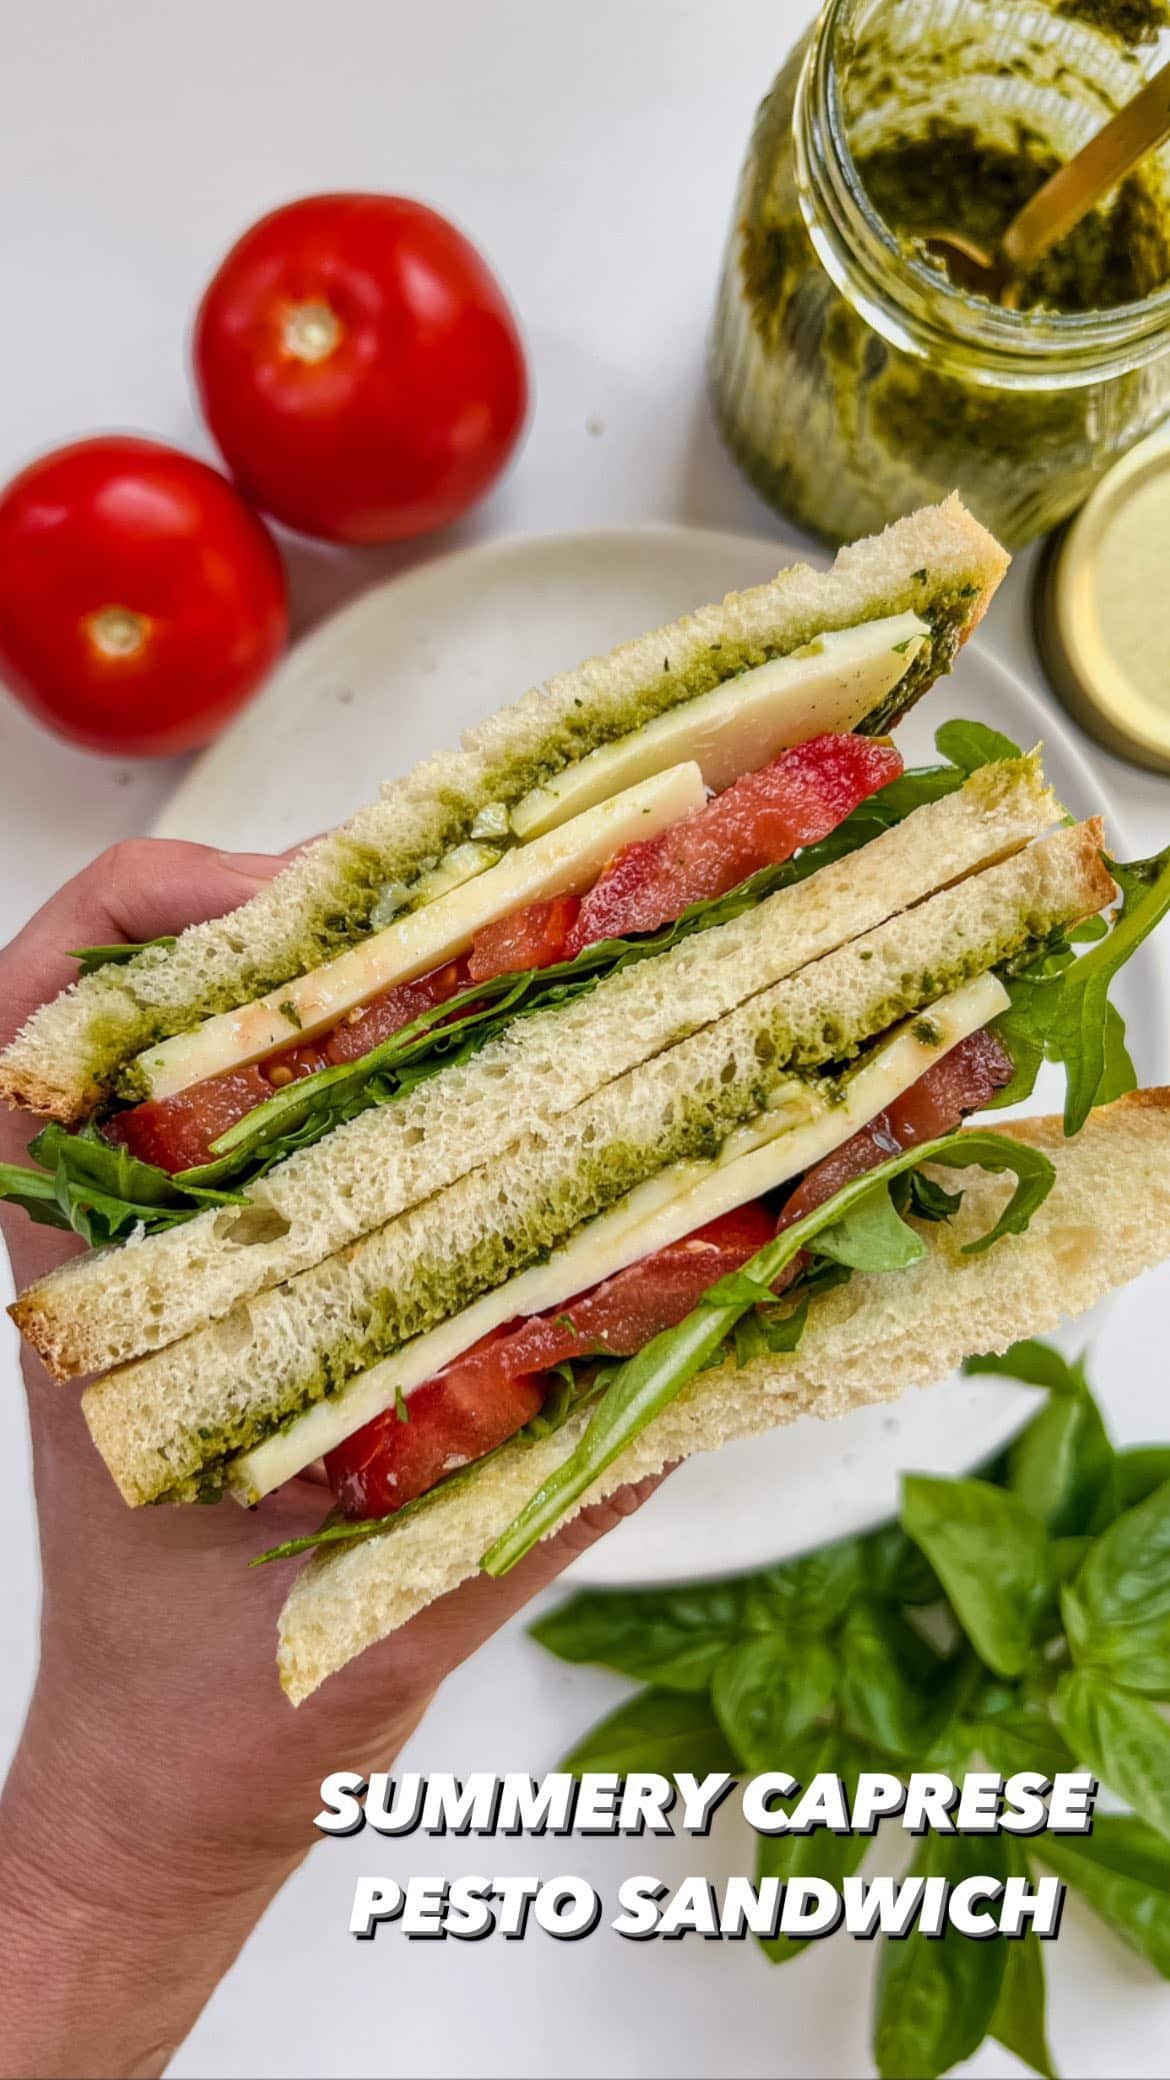 SUMMERY CAPRESE PESTO SANDWICH🍅 i’ll use any vessel for my favorite pesto!🌿
.
what you need to make it:
-sourdough
-pesto (recipe below)
-mozzarella
-tomato
-basil
-arugula
-olive oil
-sea salt & pepper
.
for the pesto:
-2-2 1/2 cups packed basil
-1/2 cup grated parmesan
-1/2 cup olive oil
-1/3 cup pine nuts
-1 tsp garlic, chopped
-1/4 tsp sea salt 
-sprinkle of black pepper
.
pour it all in the food processor or blender & blend it up! when it’s done, test it out and see if you want more of anything👌🏻 i make a big batch & freeze some in individual portions so they’ll be easy to pull out later!🪴
.
enjoying all the flavors of summer when i can!☀️ what’s your favorite way to use pesto?!